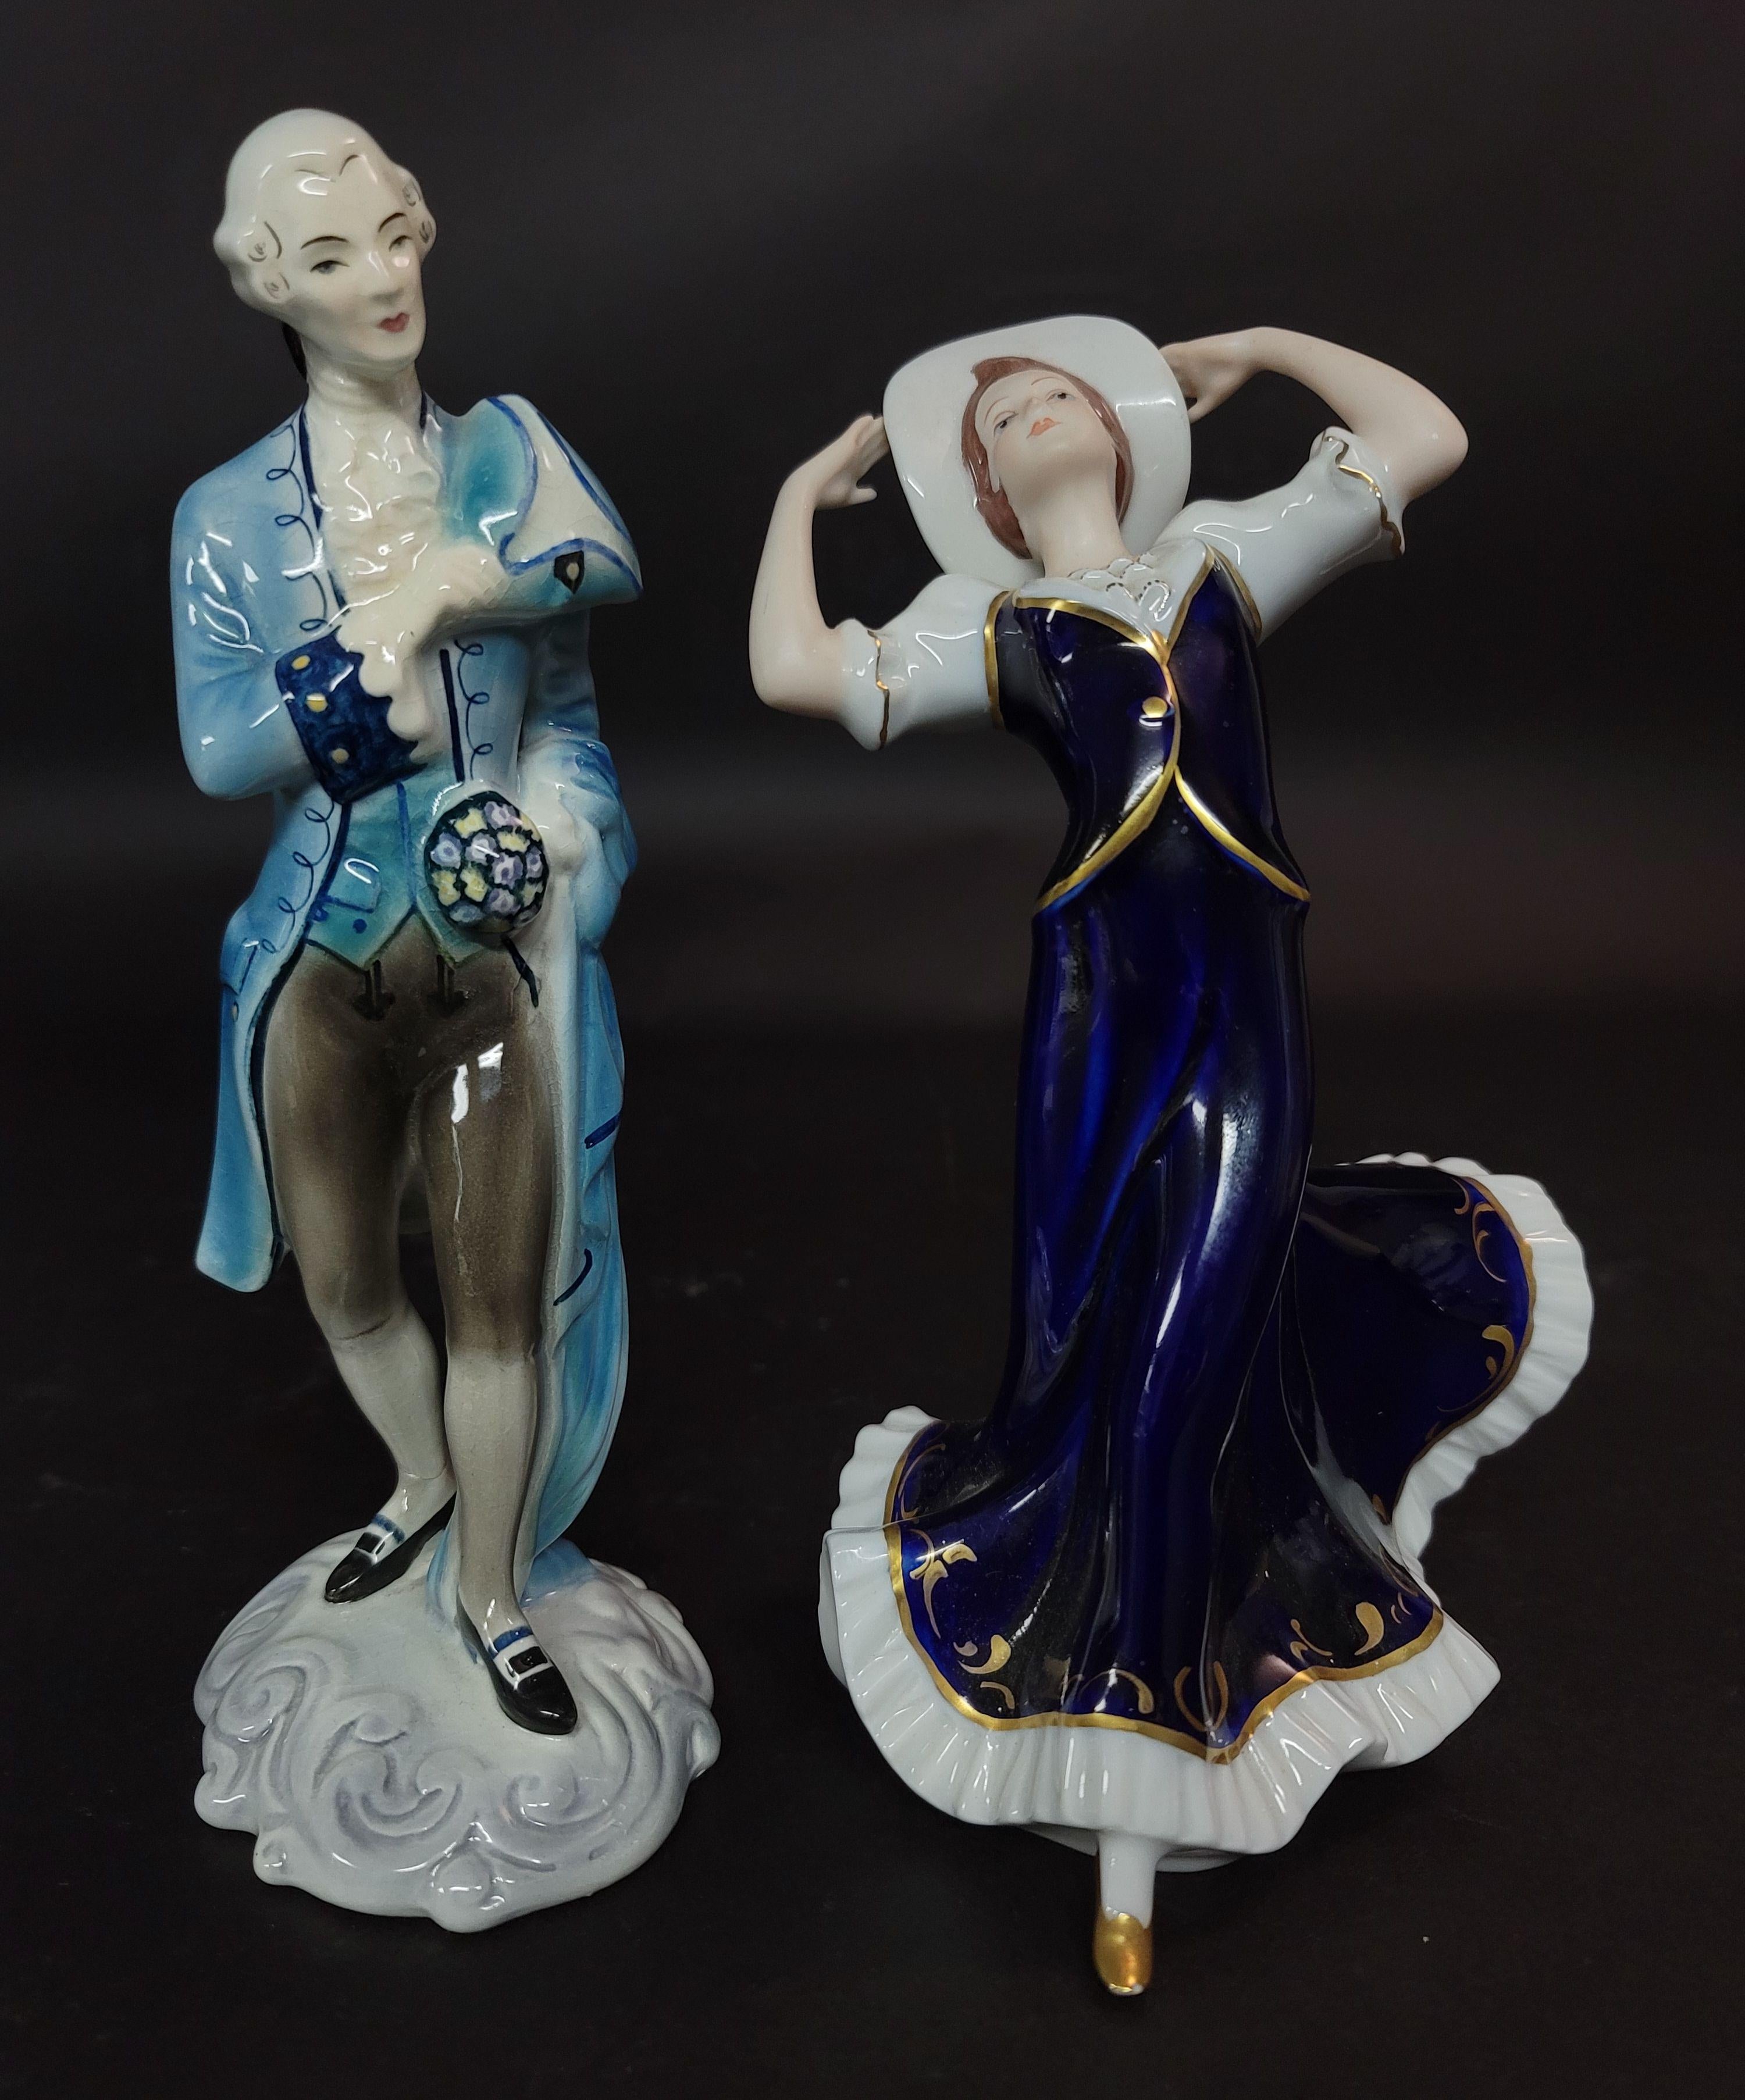 Gold Schneider-the gentleman and royal dux- the lady figures

The Gentleman-German 5